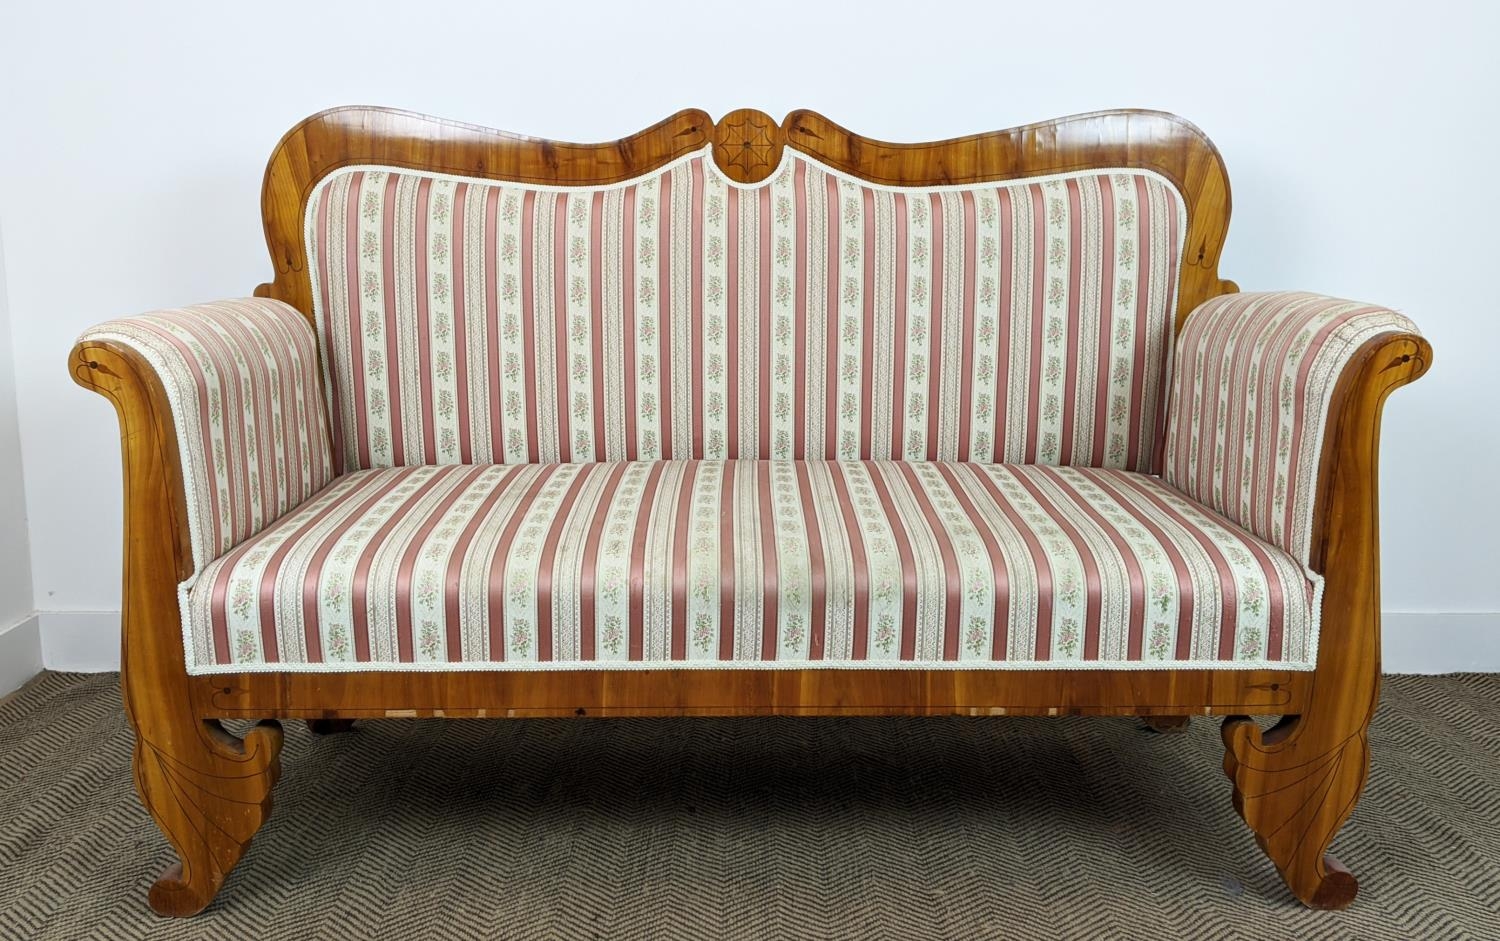 SOFA, Biedermeier cherrywood and line inlaid with pink striped upholstery, 104cm H x 168cm x 68cm. - Image 4 of 24